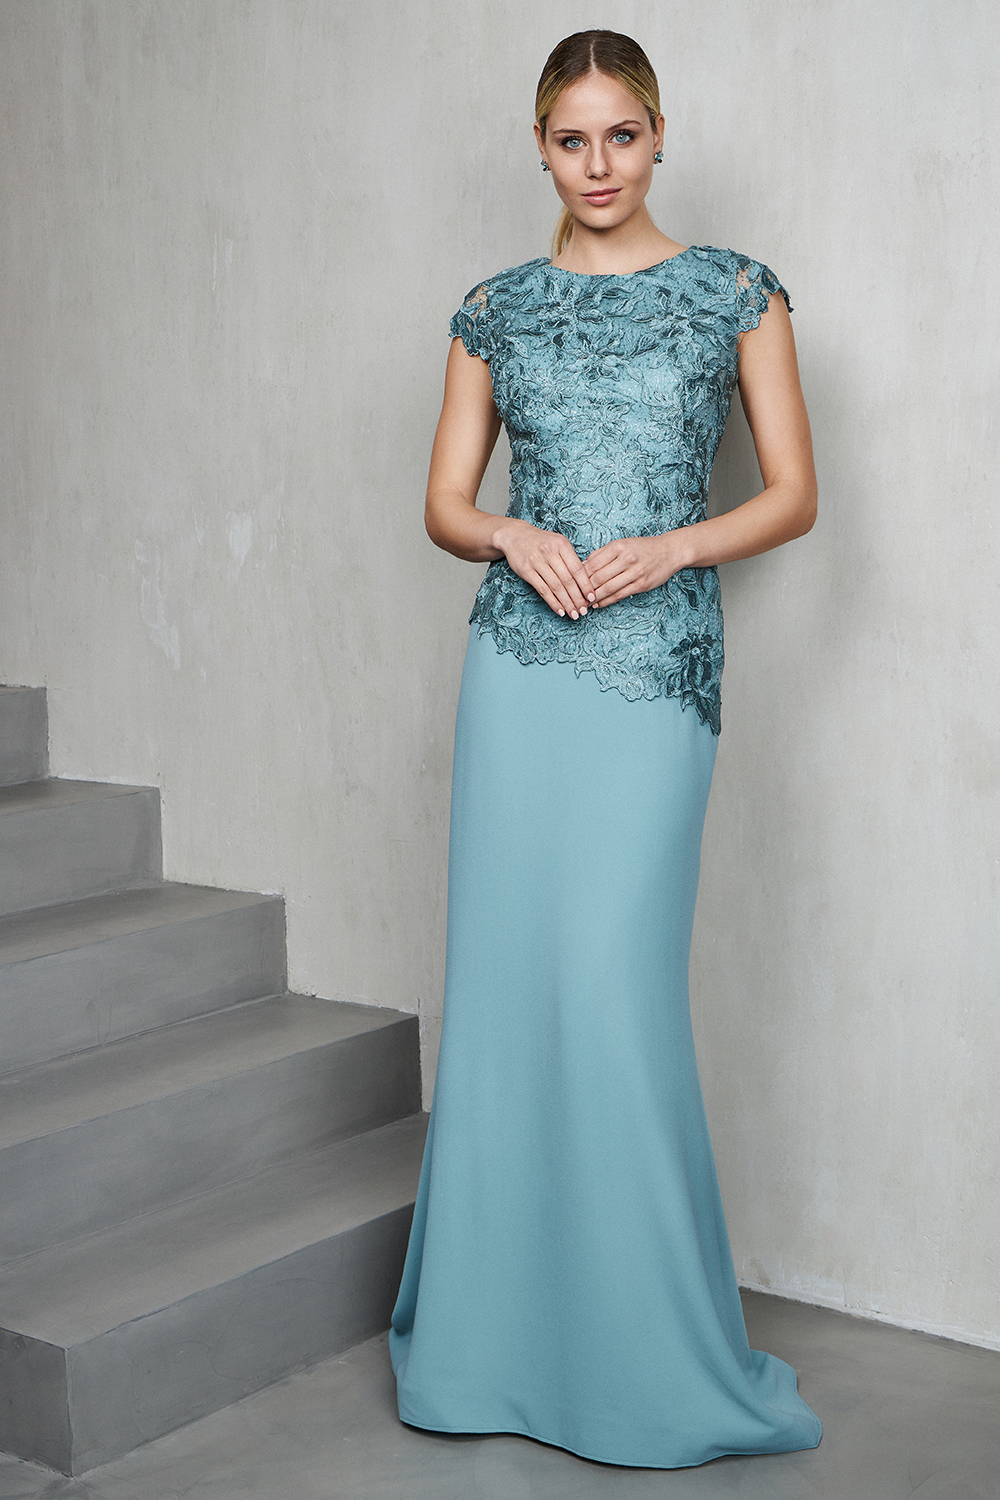 Классические платья / Long evening dress with lace top for the mother of the bride